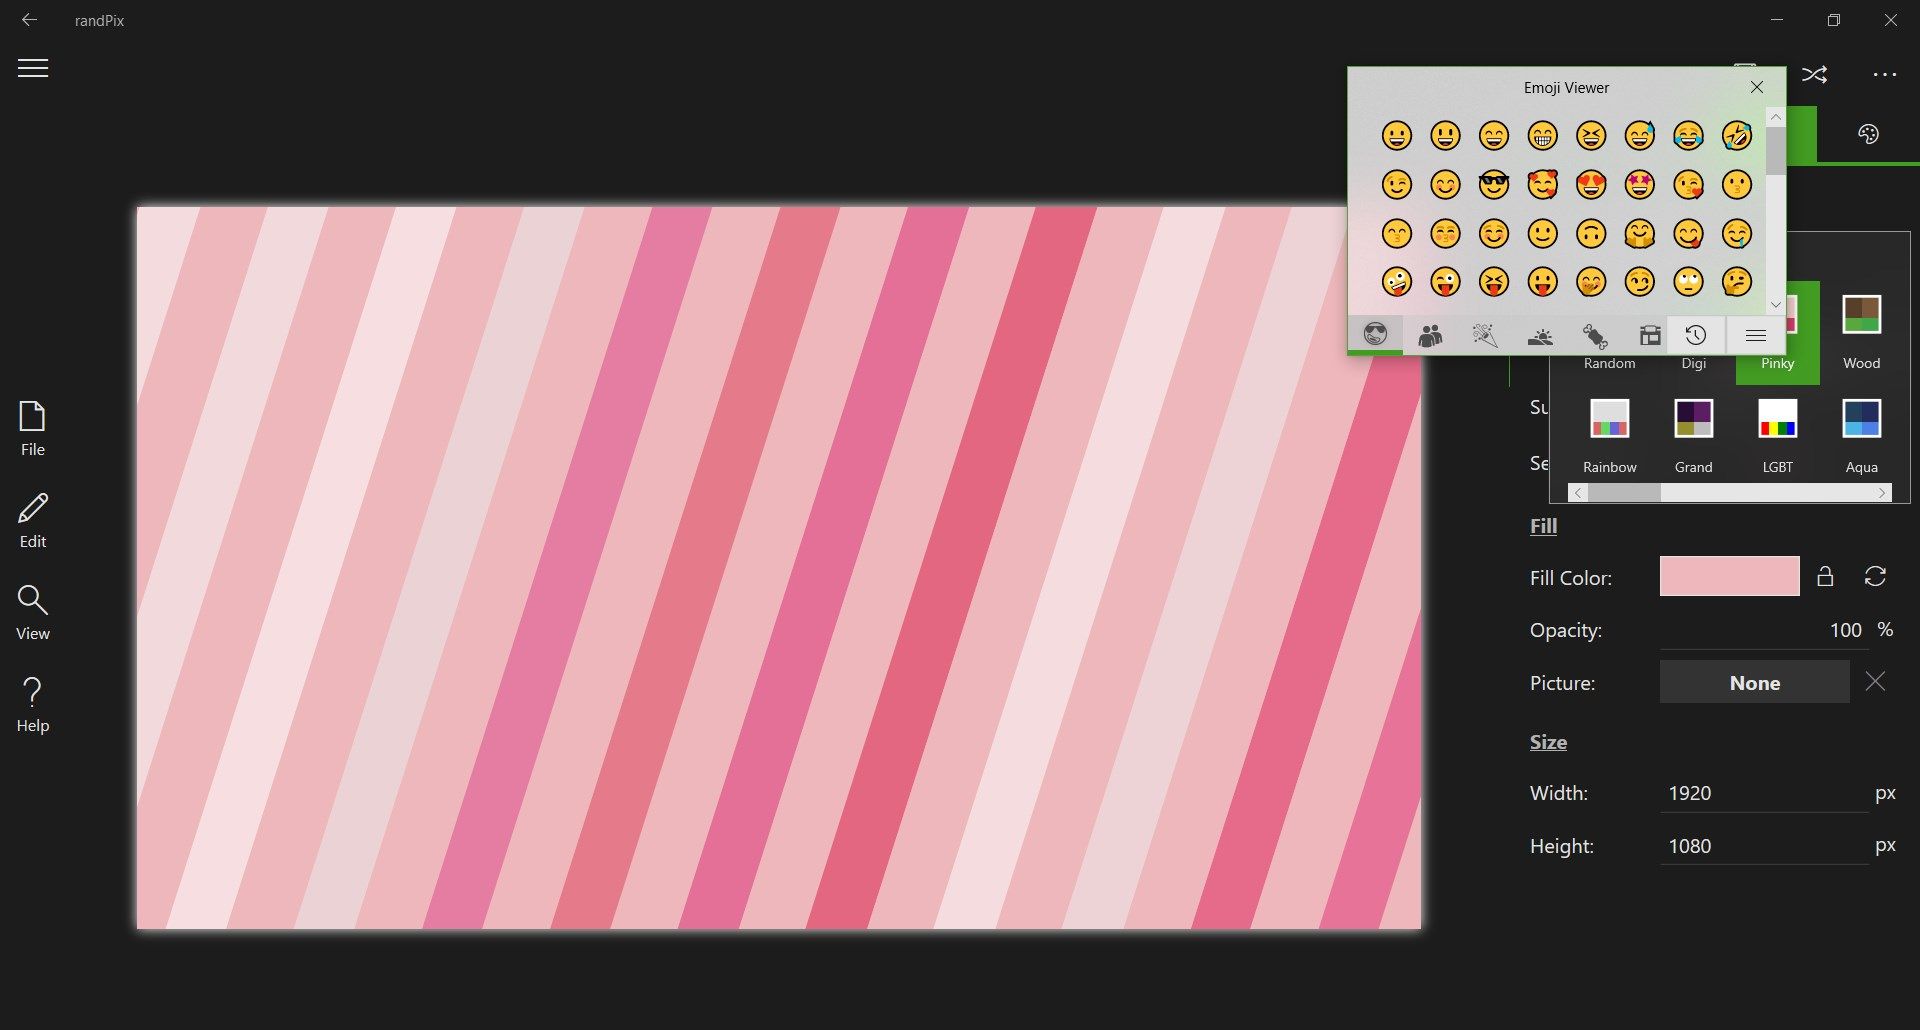 Overlay Mode pin the app on top of other windows. This let you drag and drop emoji in an easier way.